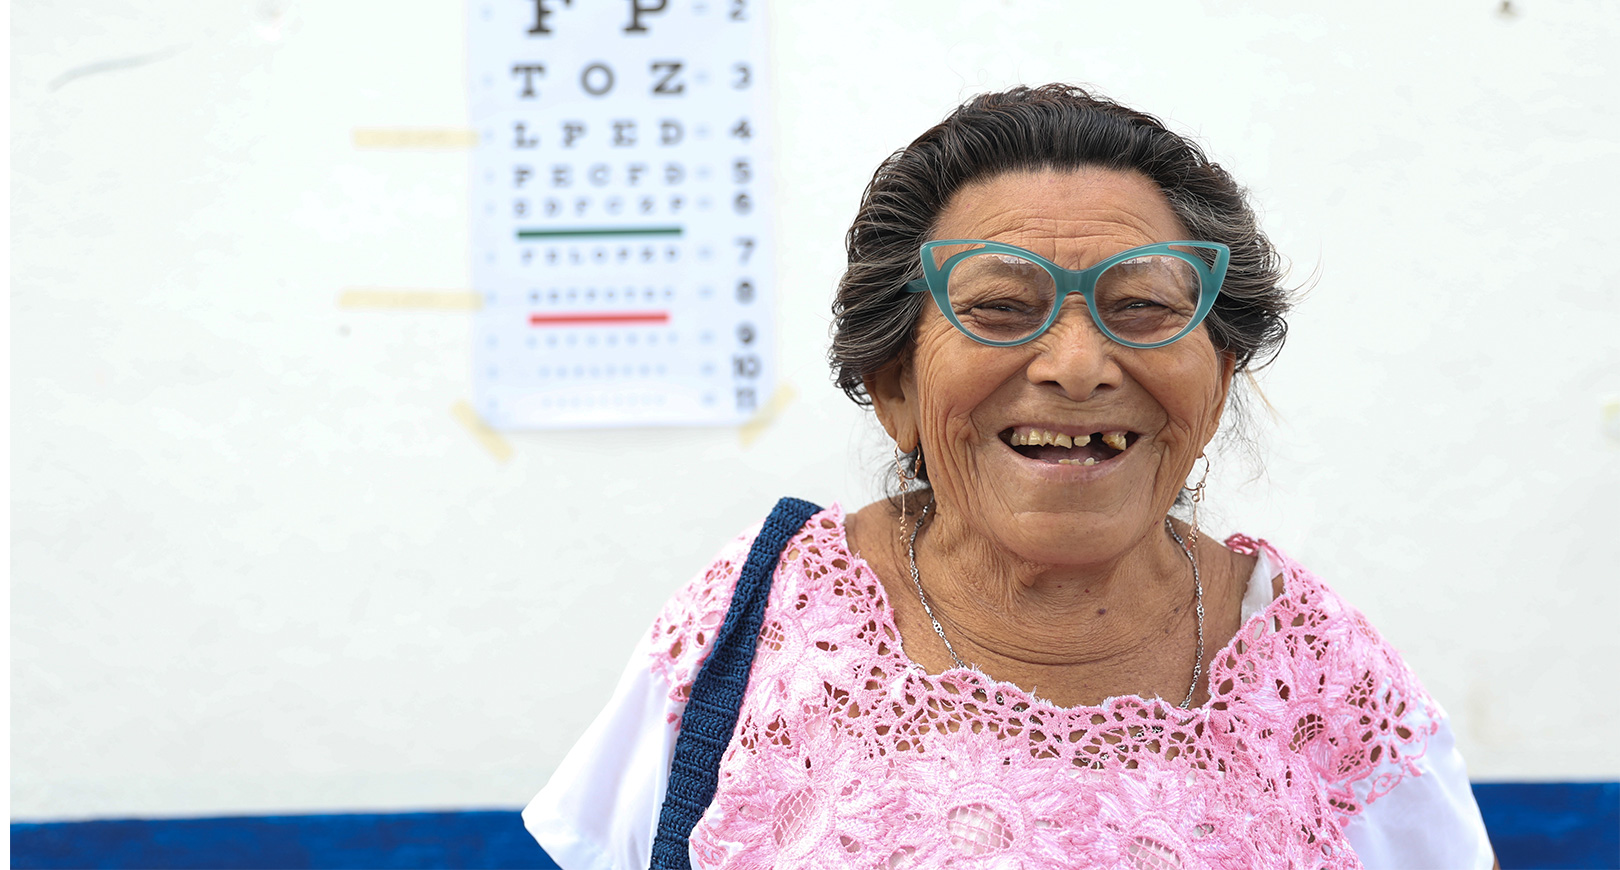 Old woman wearing glasses